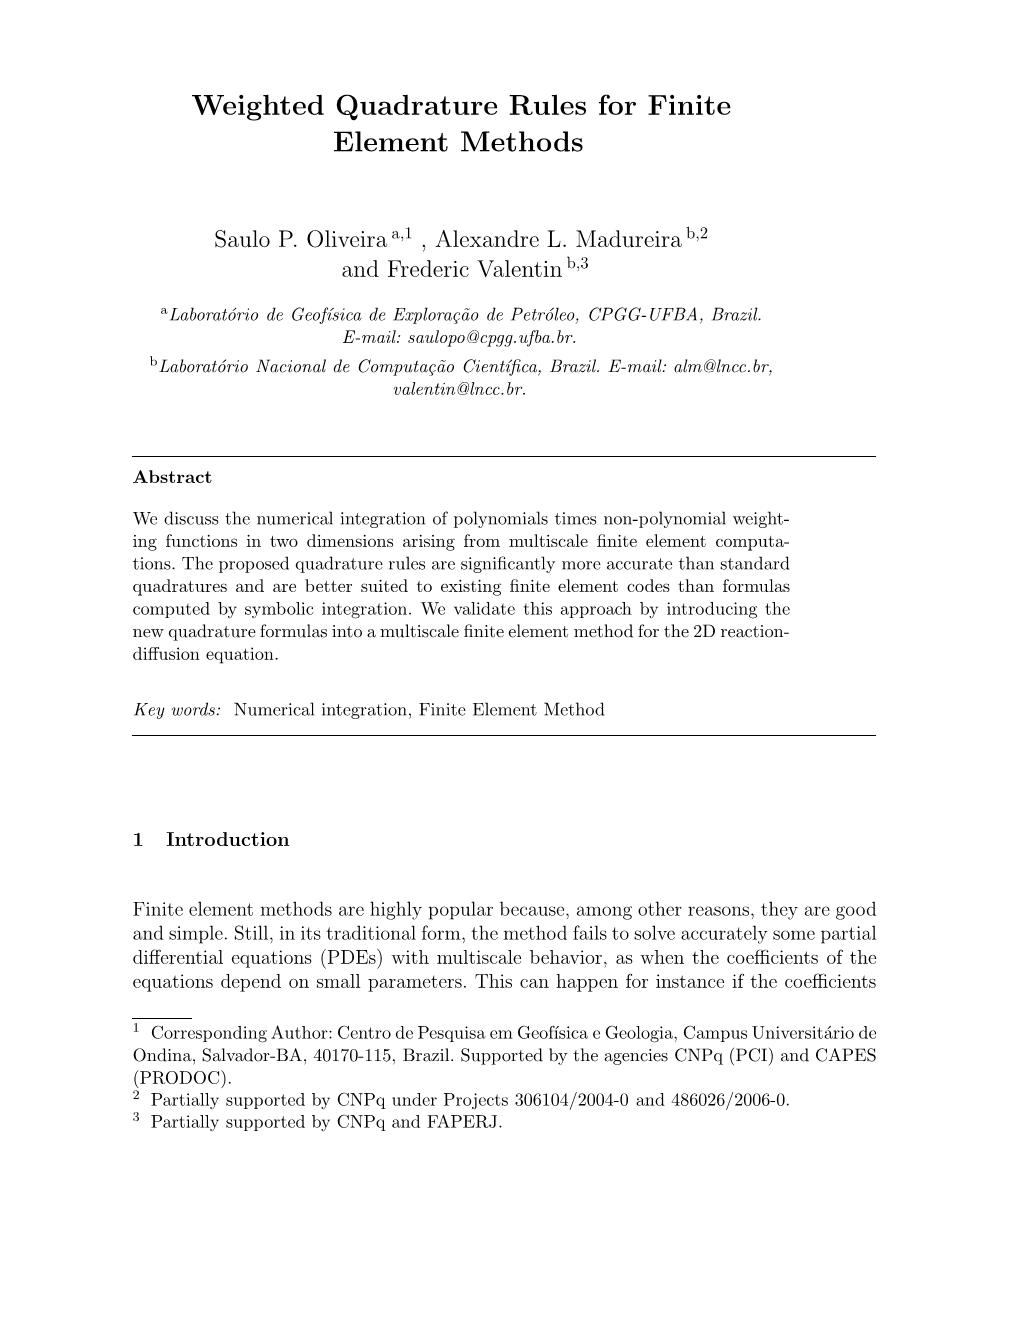 Weighted Quadrature Rules for Finite Element Methods